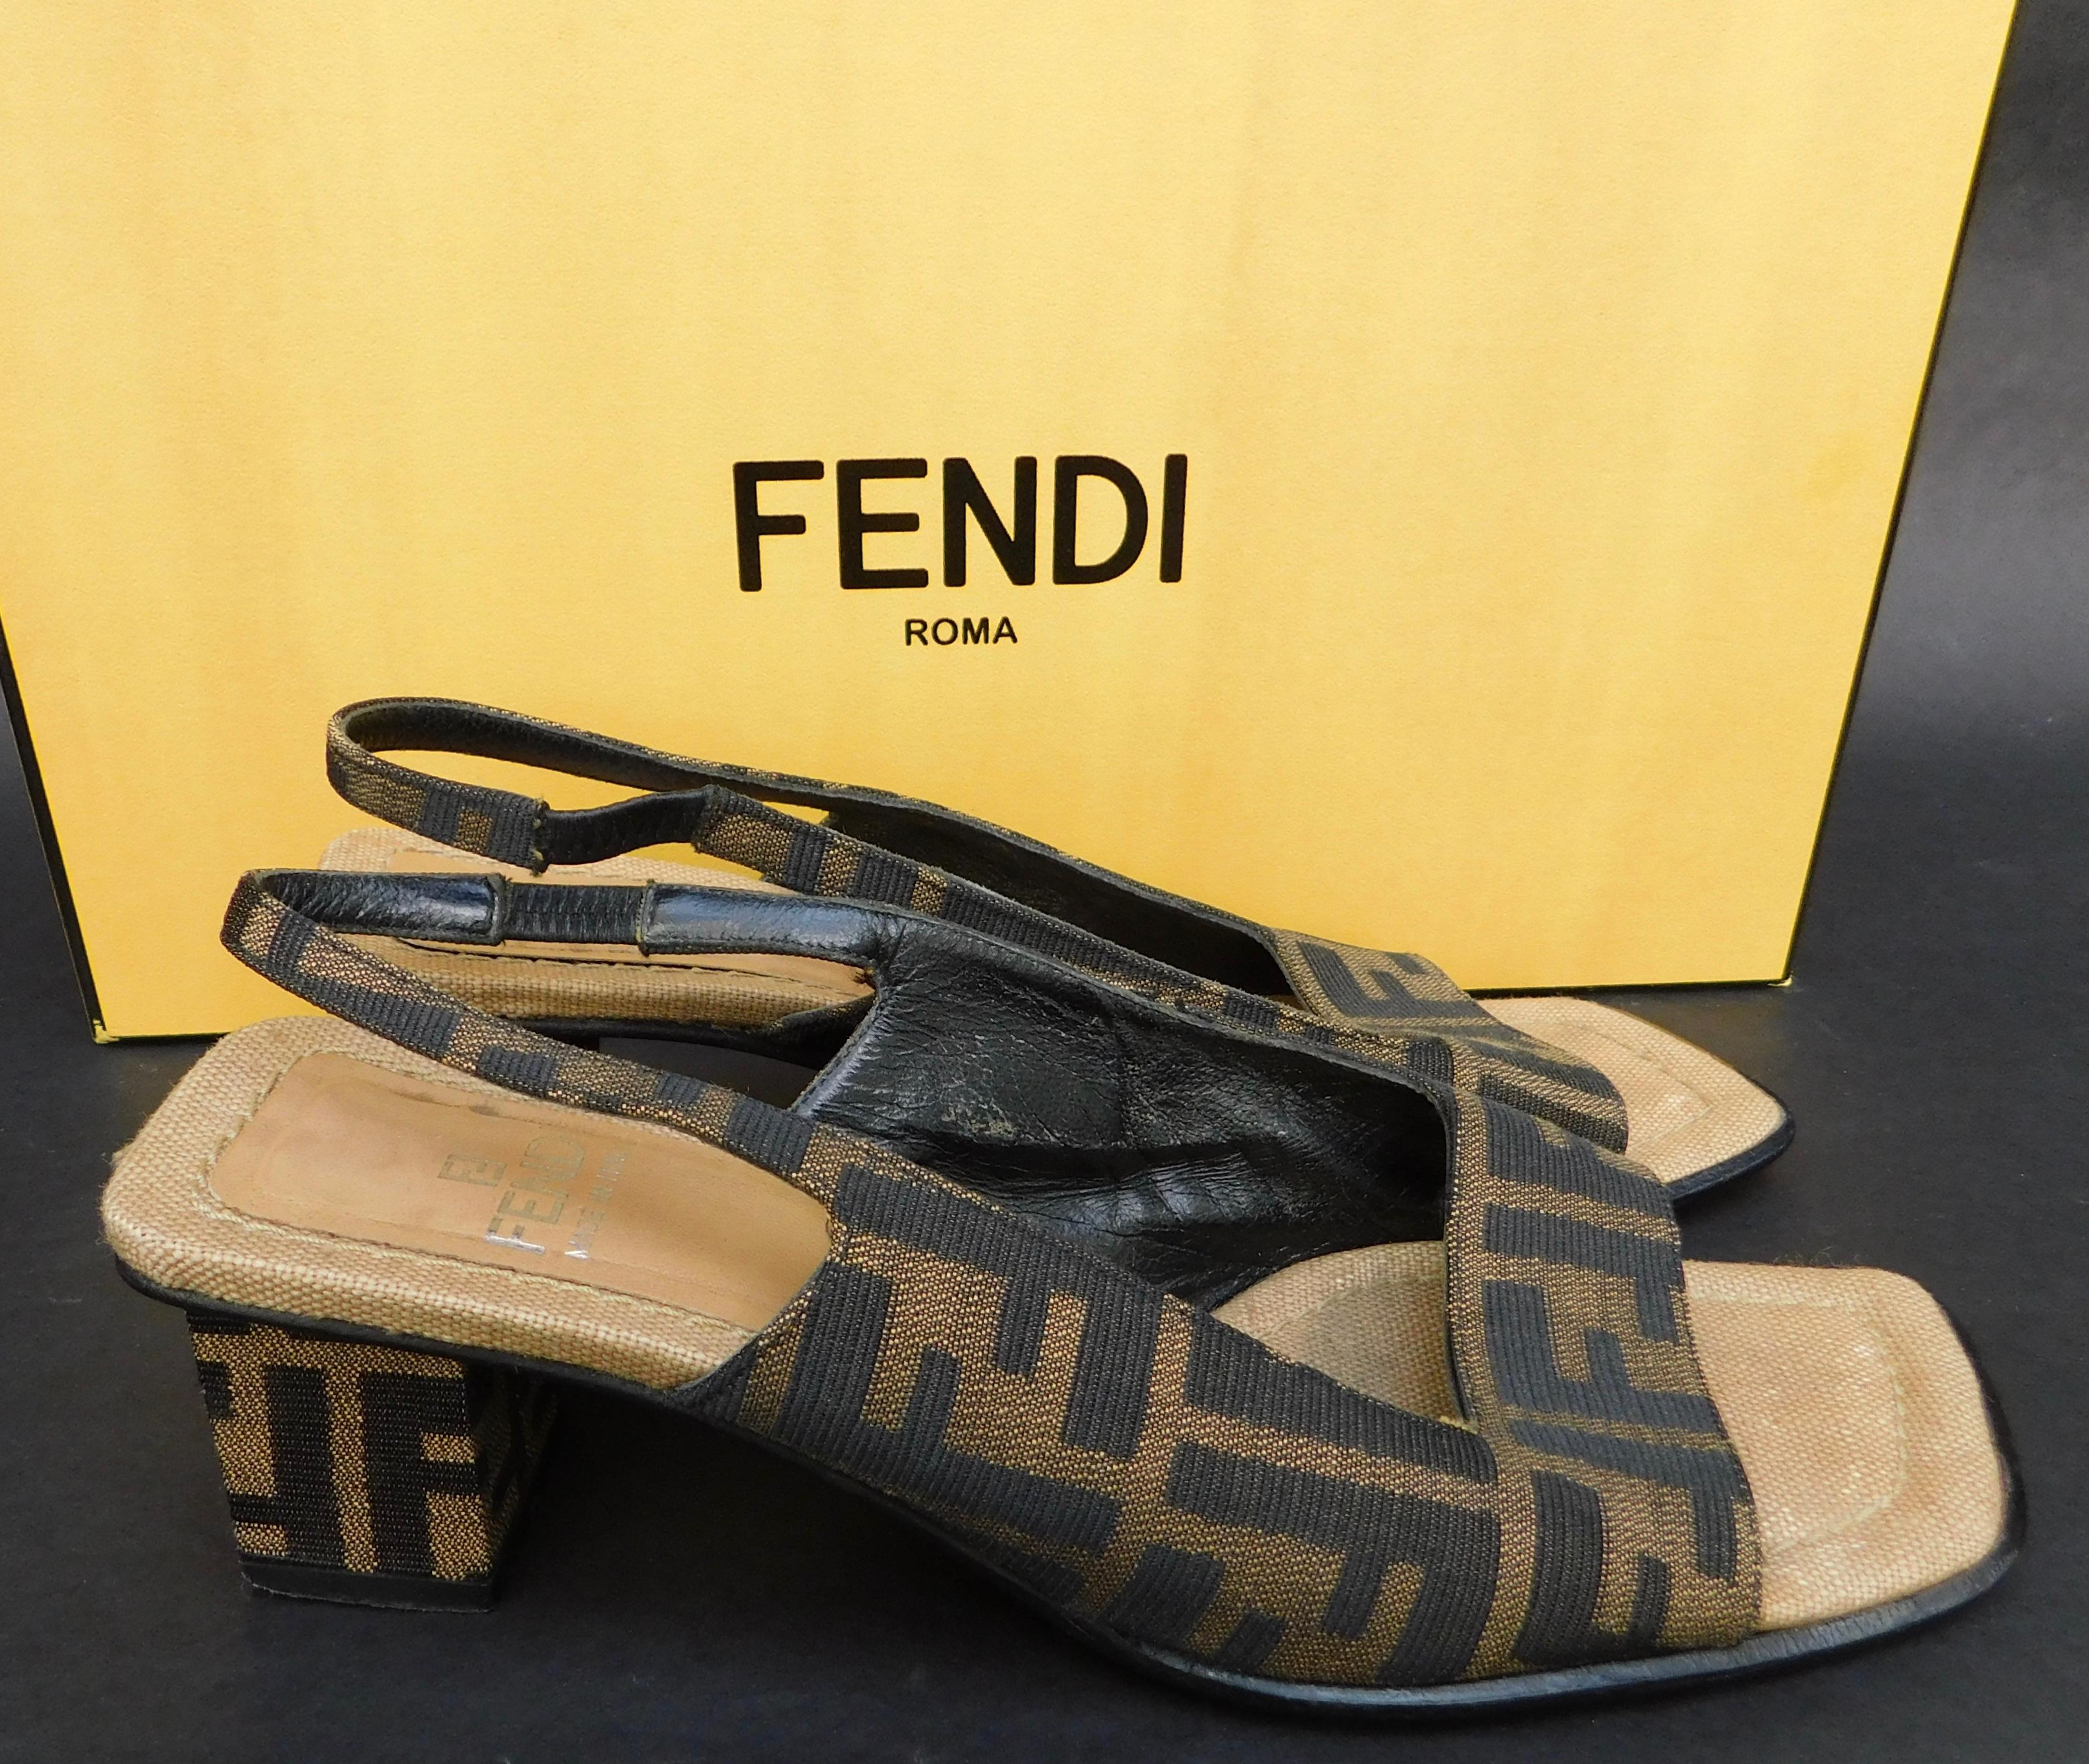 Vintage Fendi Zucca logo slingback block heel sandals. Printed logo canvas exterior lined in brown leather. Covered box heel 6cm (2-3/4